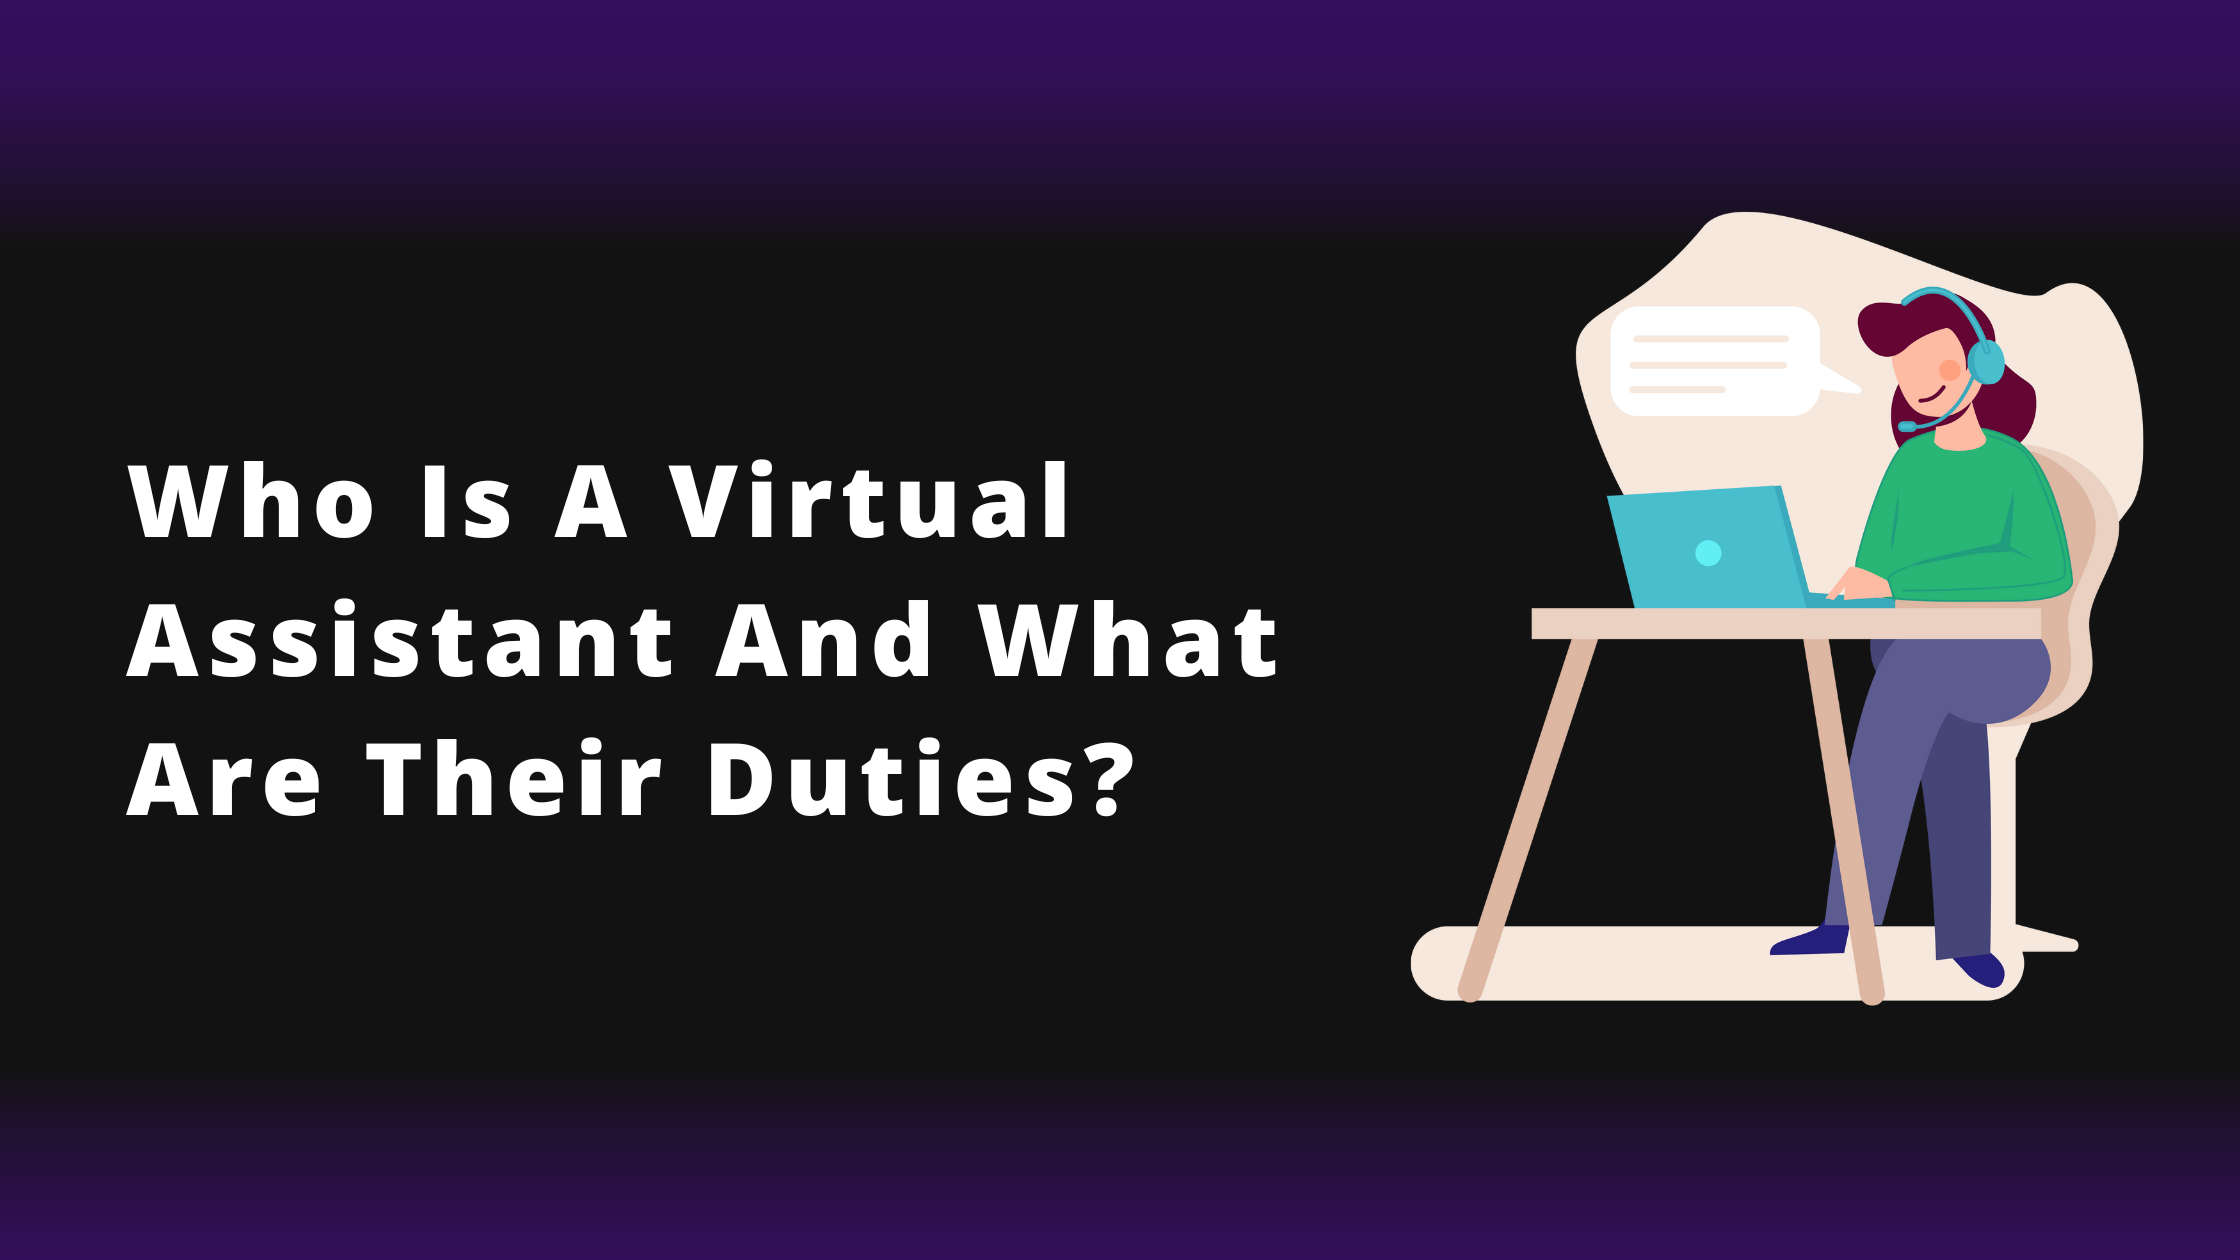 Who is a Virtual Assistant and what are their duties?